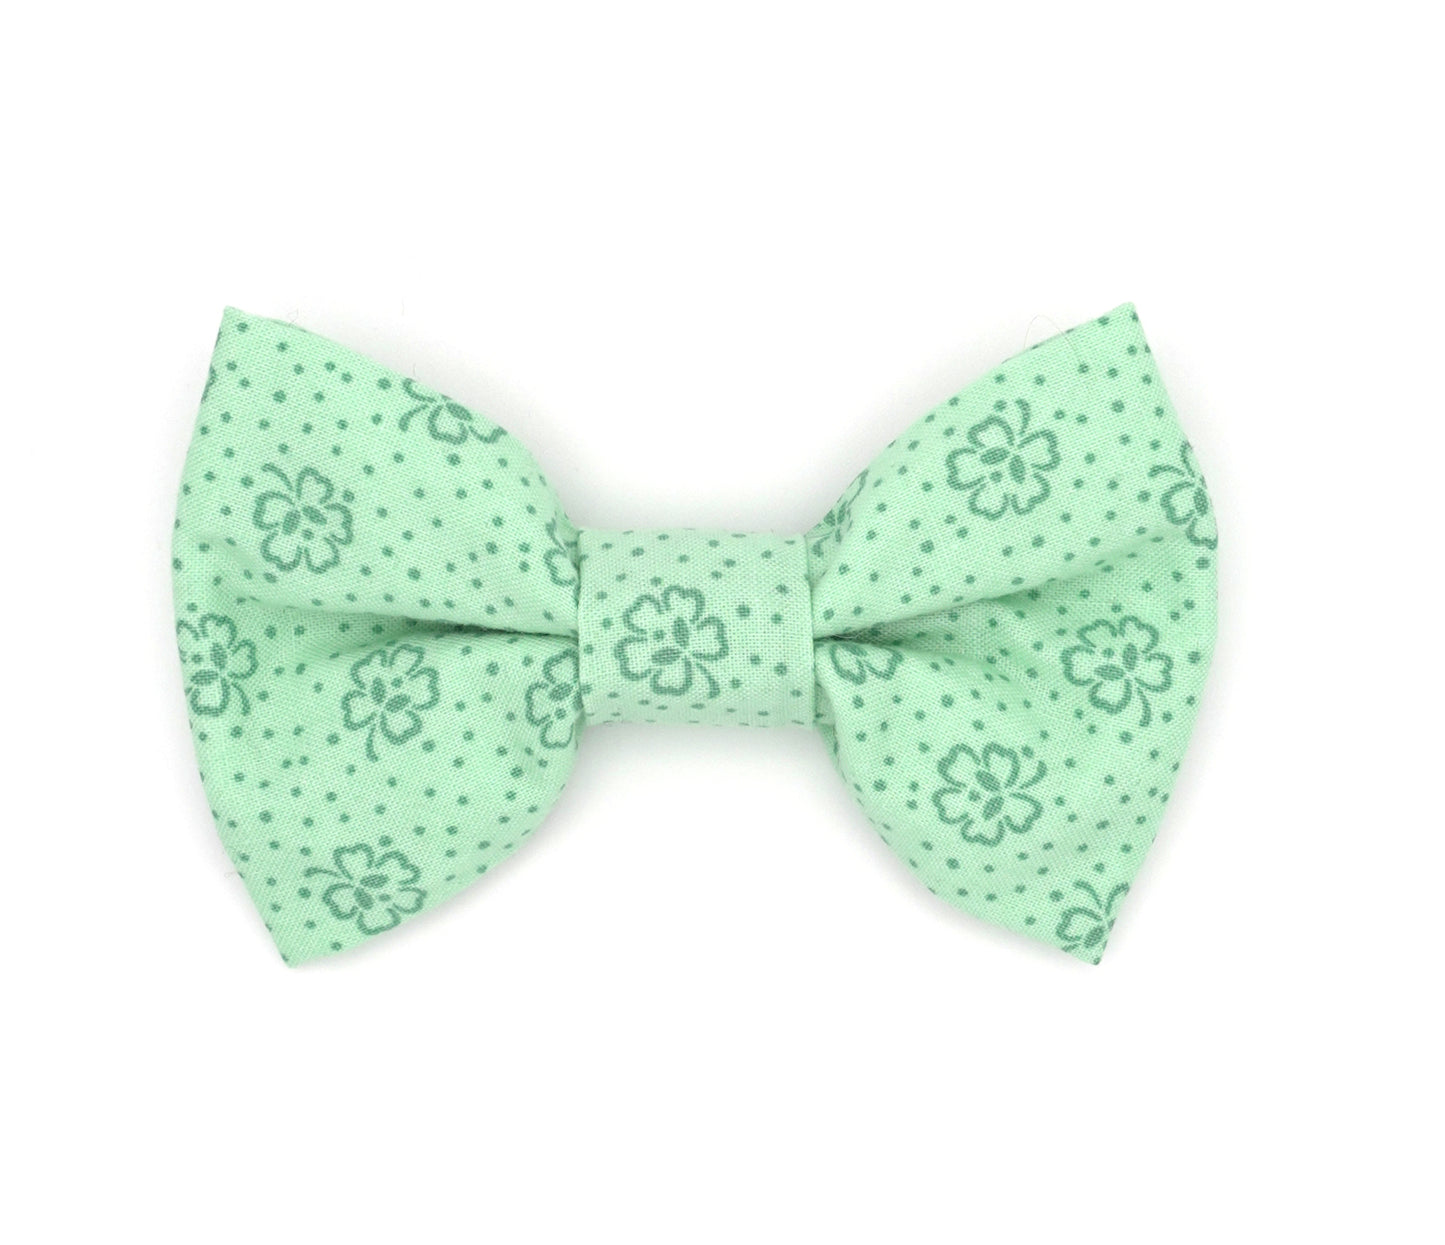 Handmade cotton bow tie for dogs (or other pets). Elastic straps on back with snaps make it easy to add to collar, harness, or leash. Light Green background with dark green four leaf clovers.